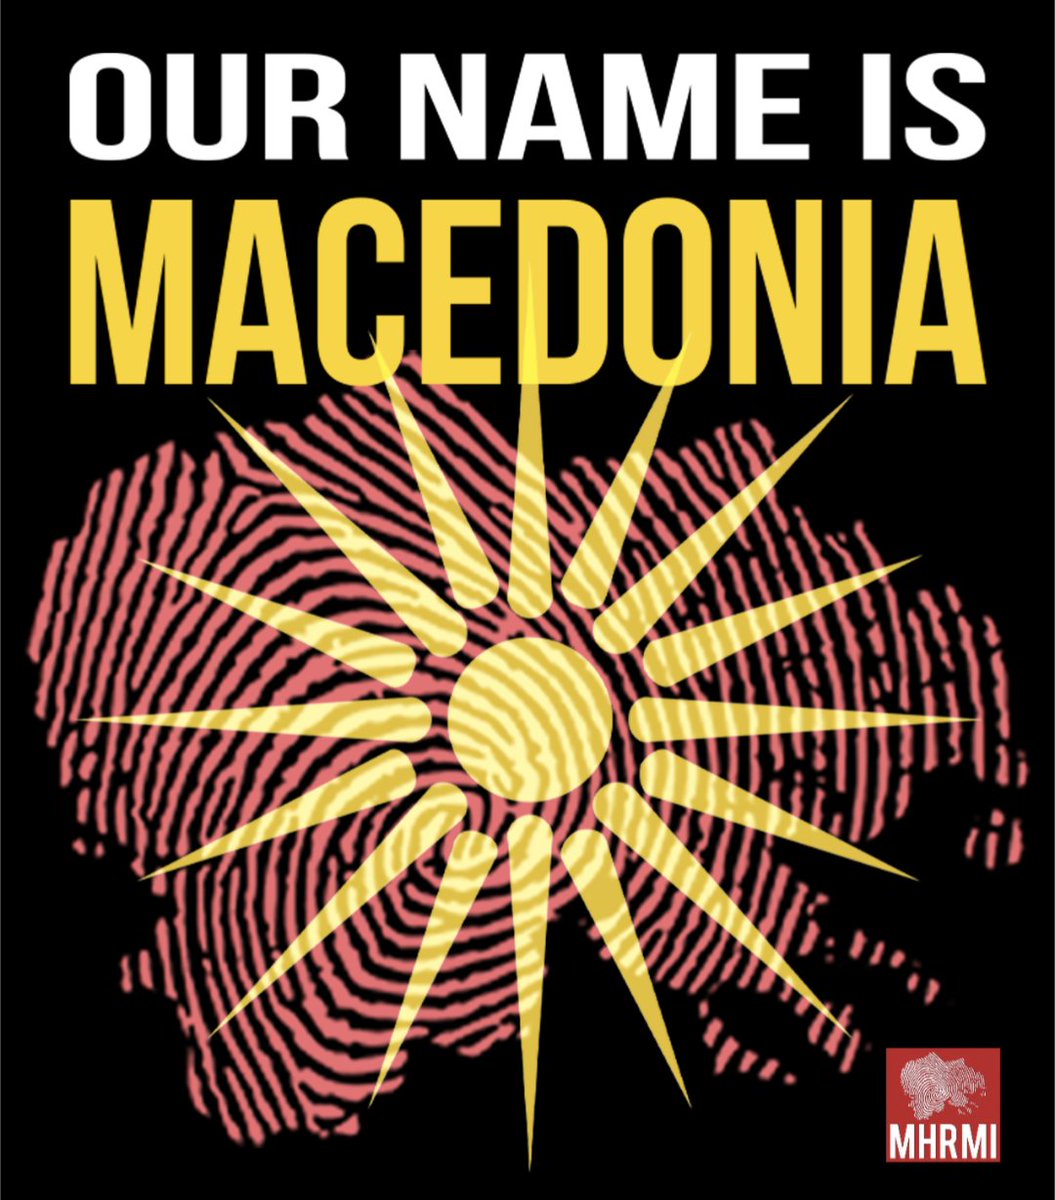 Macedonians, stop allowing people to treat #Macedonia as if it's 'new'. Independence of (part of) a state is not the birth of a nation. We are thousands of years older than the imperialists who want to control us.